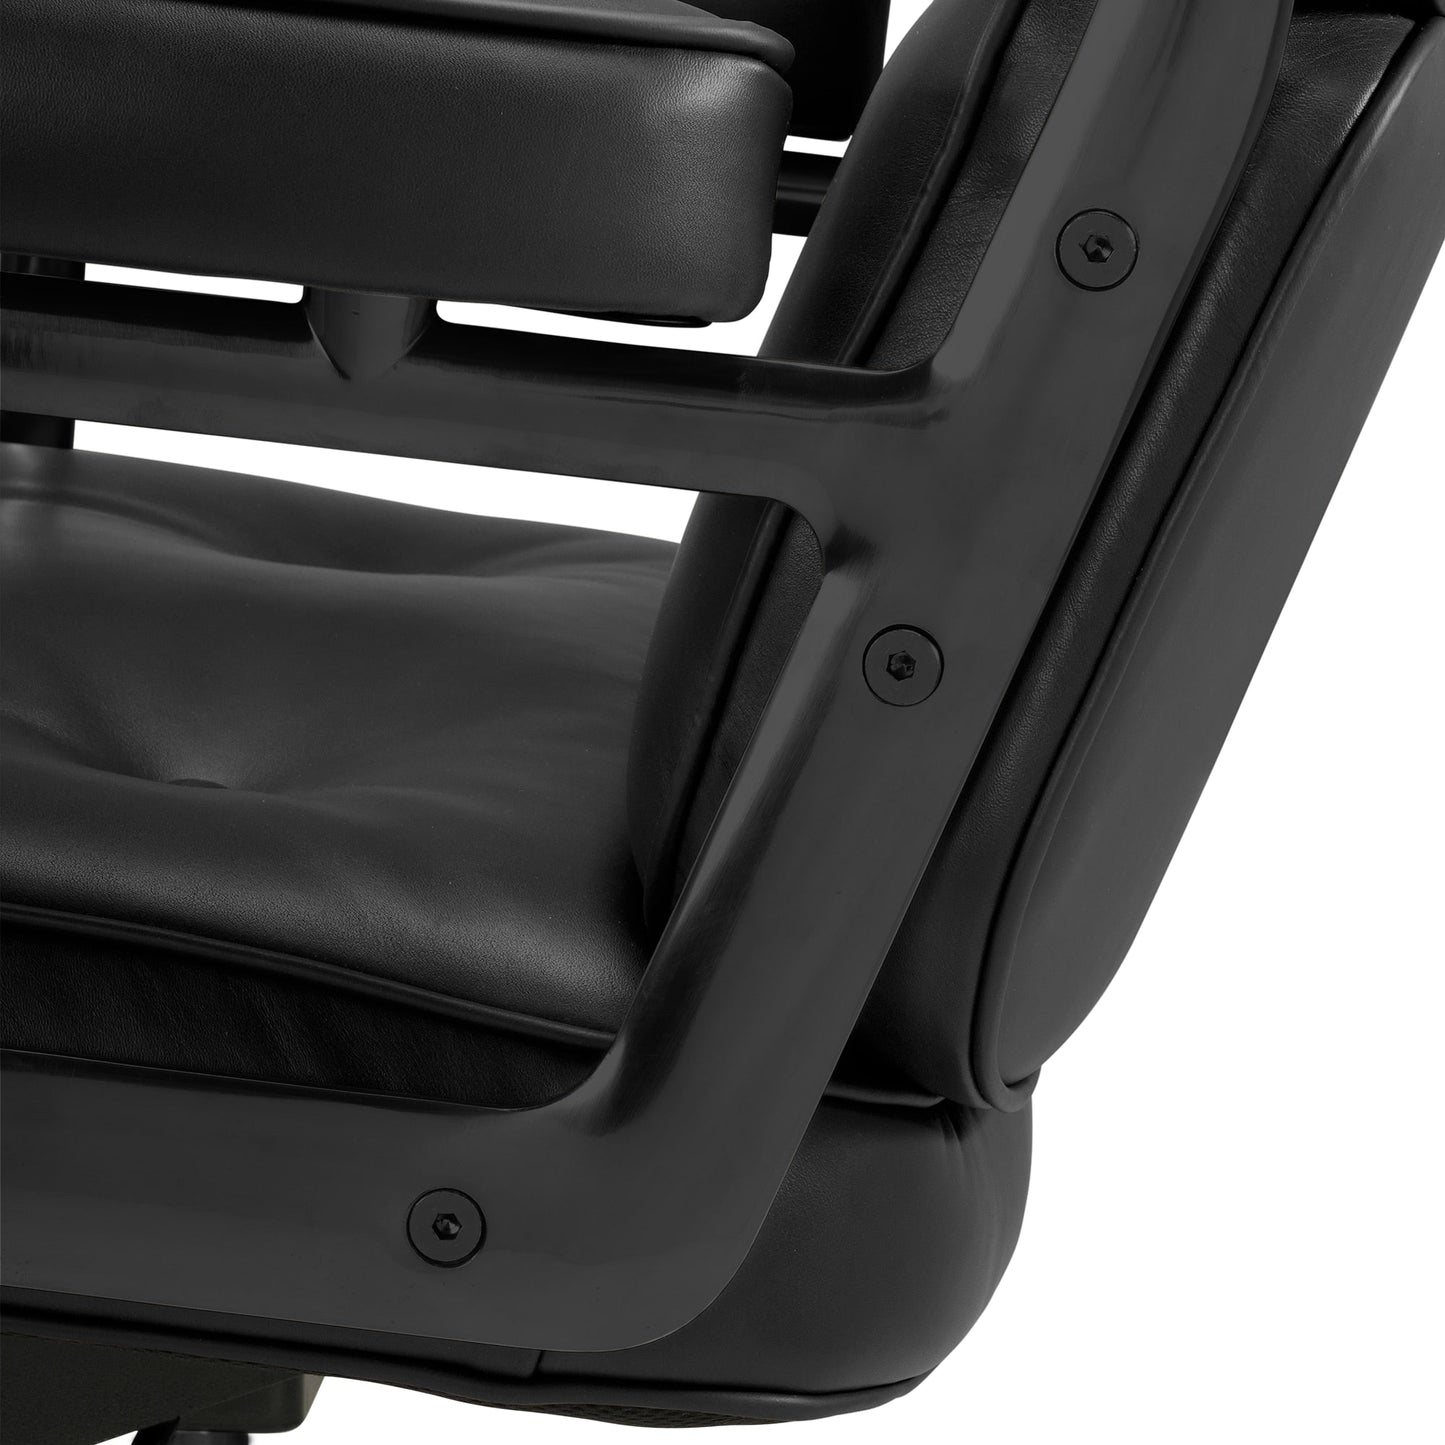 Arthia Designs - Eames Mid-Century Executive Office Leather Chair - Review